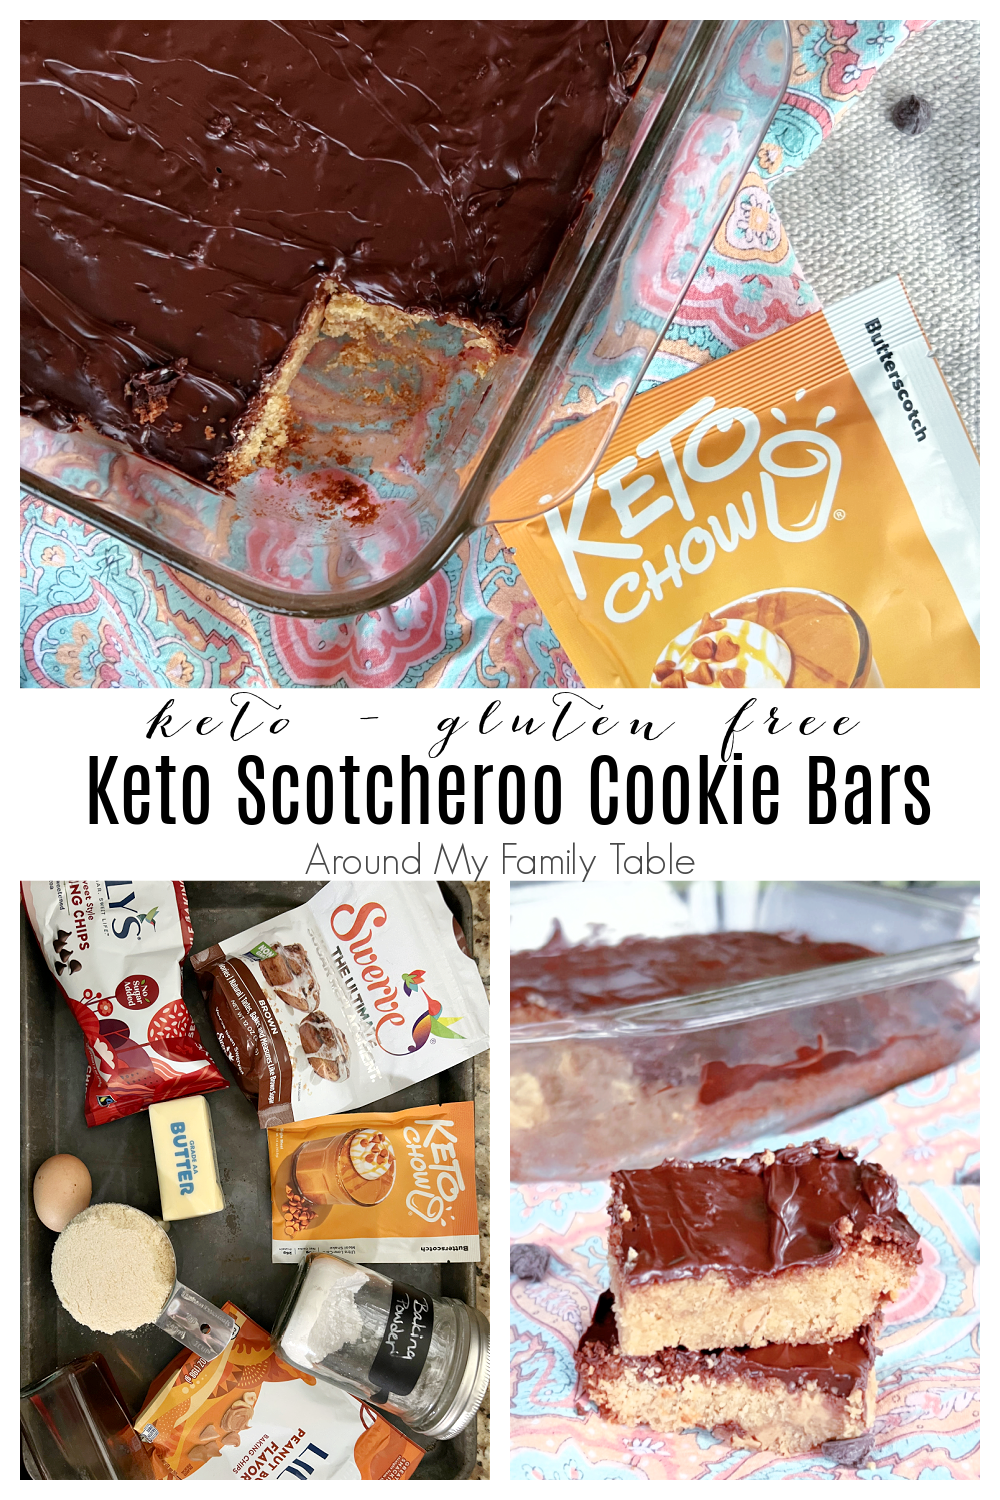 Delicious low carb, Keto Scotcheroo Cookie Bars are made with butterscotch protein powder, peanut butter chips and have a rich chocolate topping. These healthy keto scotcheroos cookie bars are a fun dessert. They are gluten free too. via @slingmama